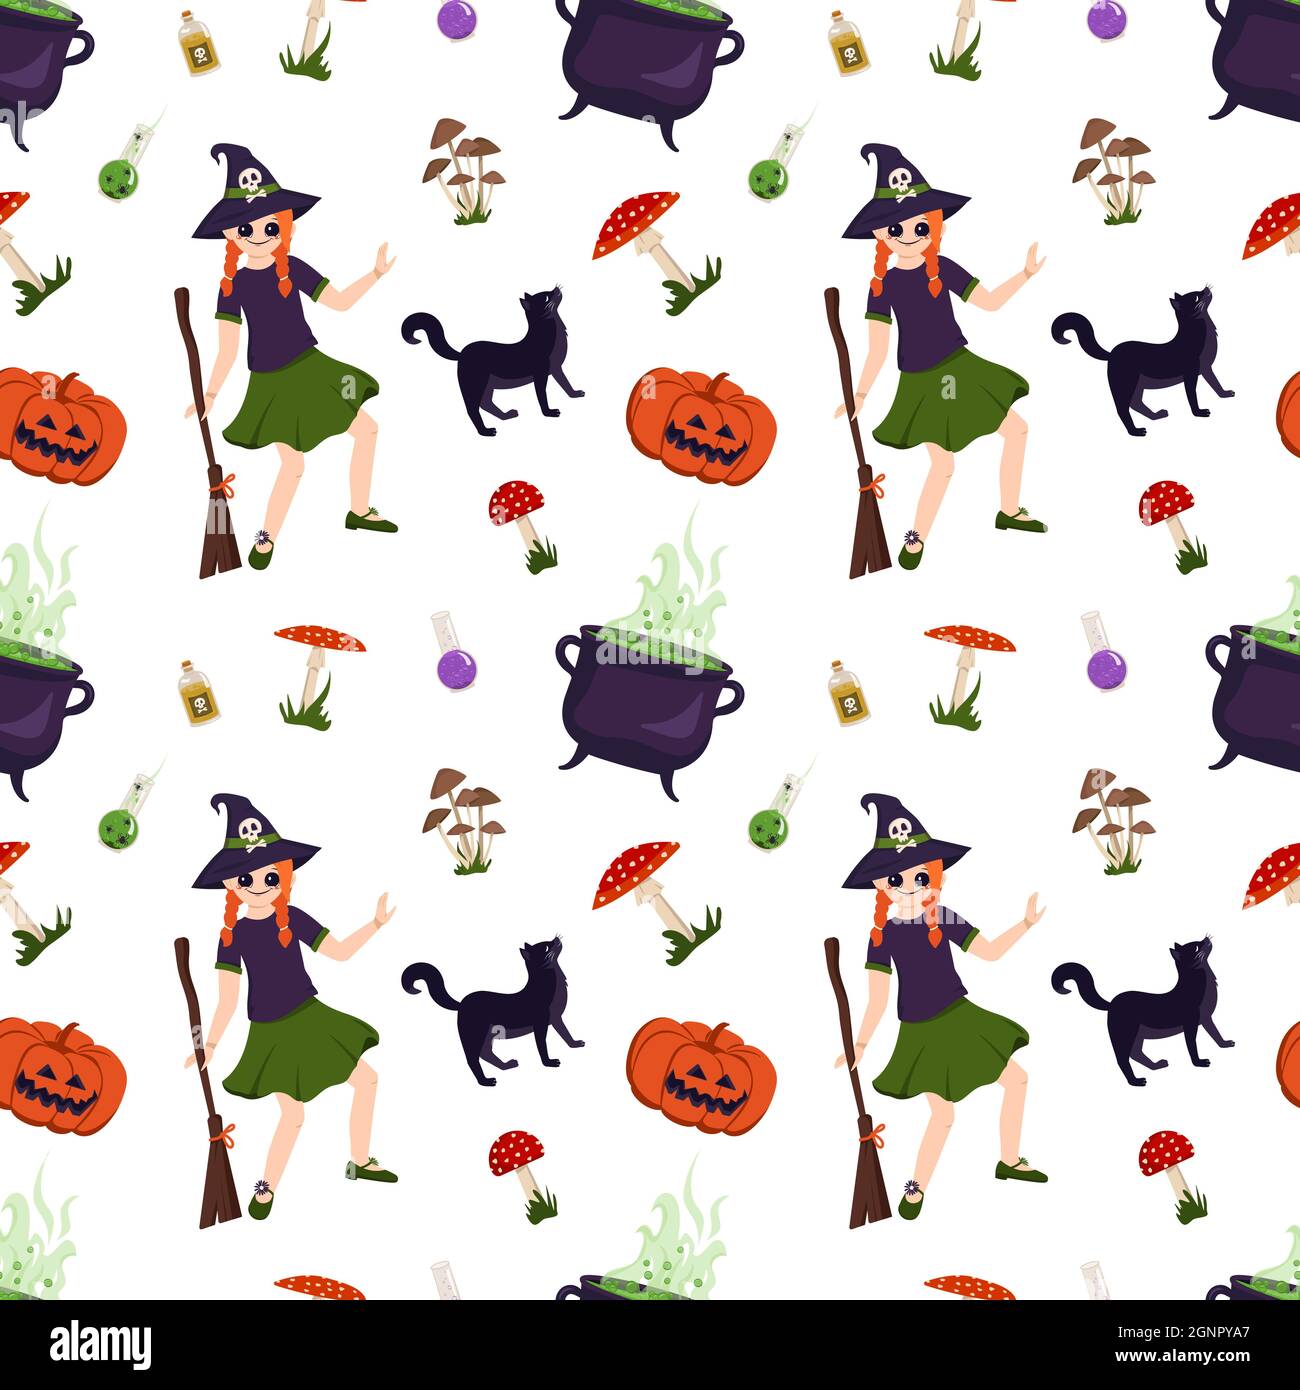 Halloween seamless pattern with girl witch, black cat, pumpkin, toadstool and fly agarics. Festive print with October holiday elements Stock Vector